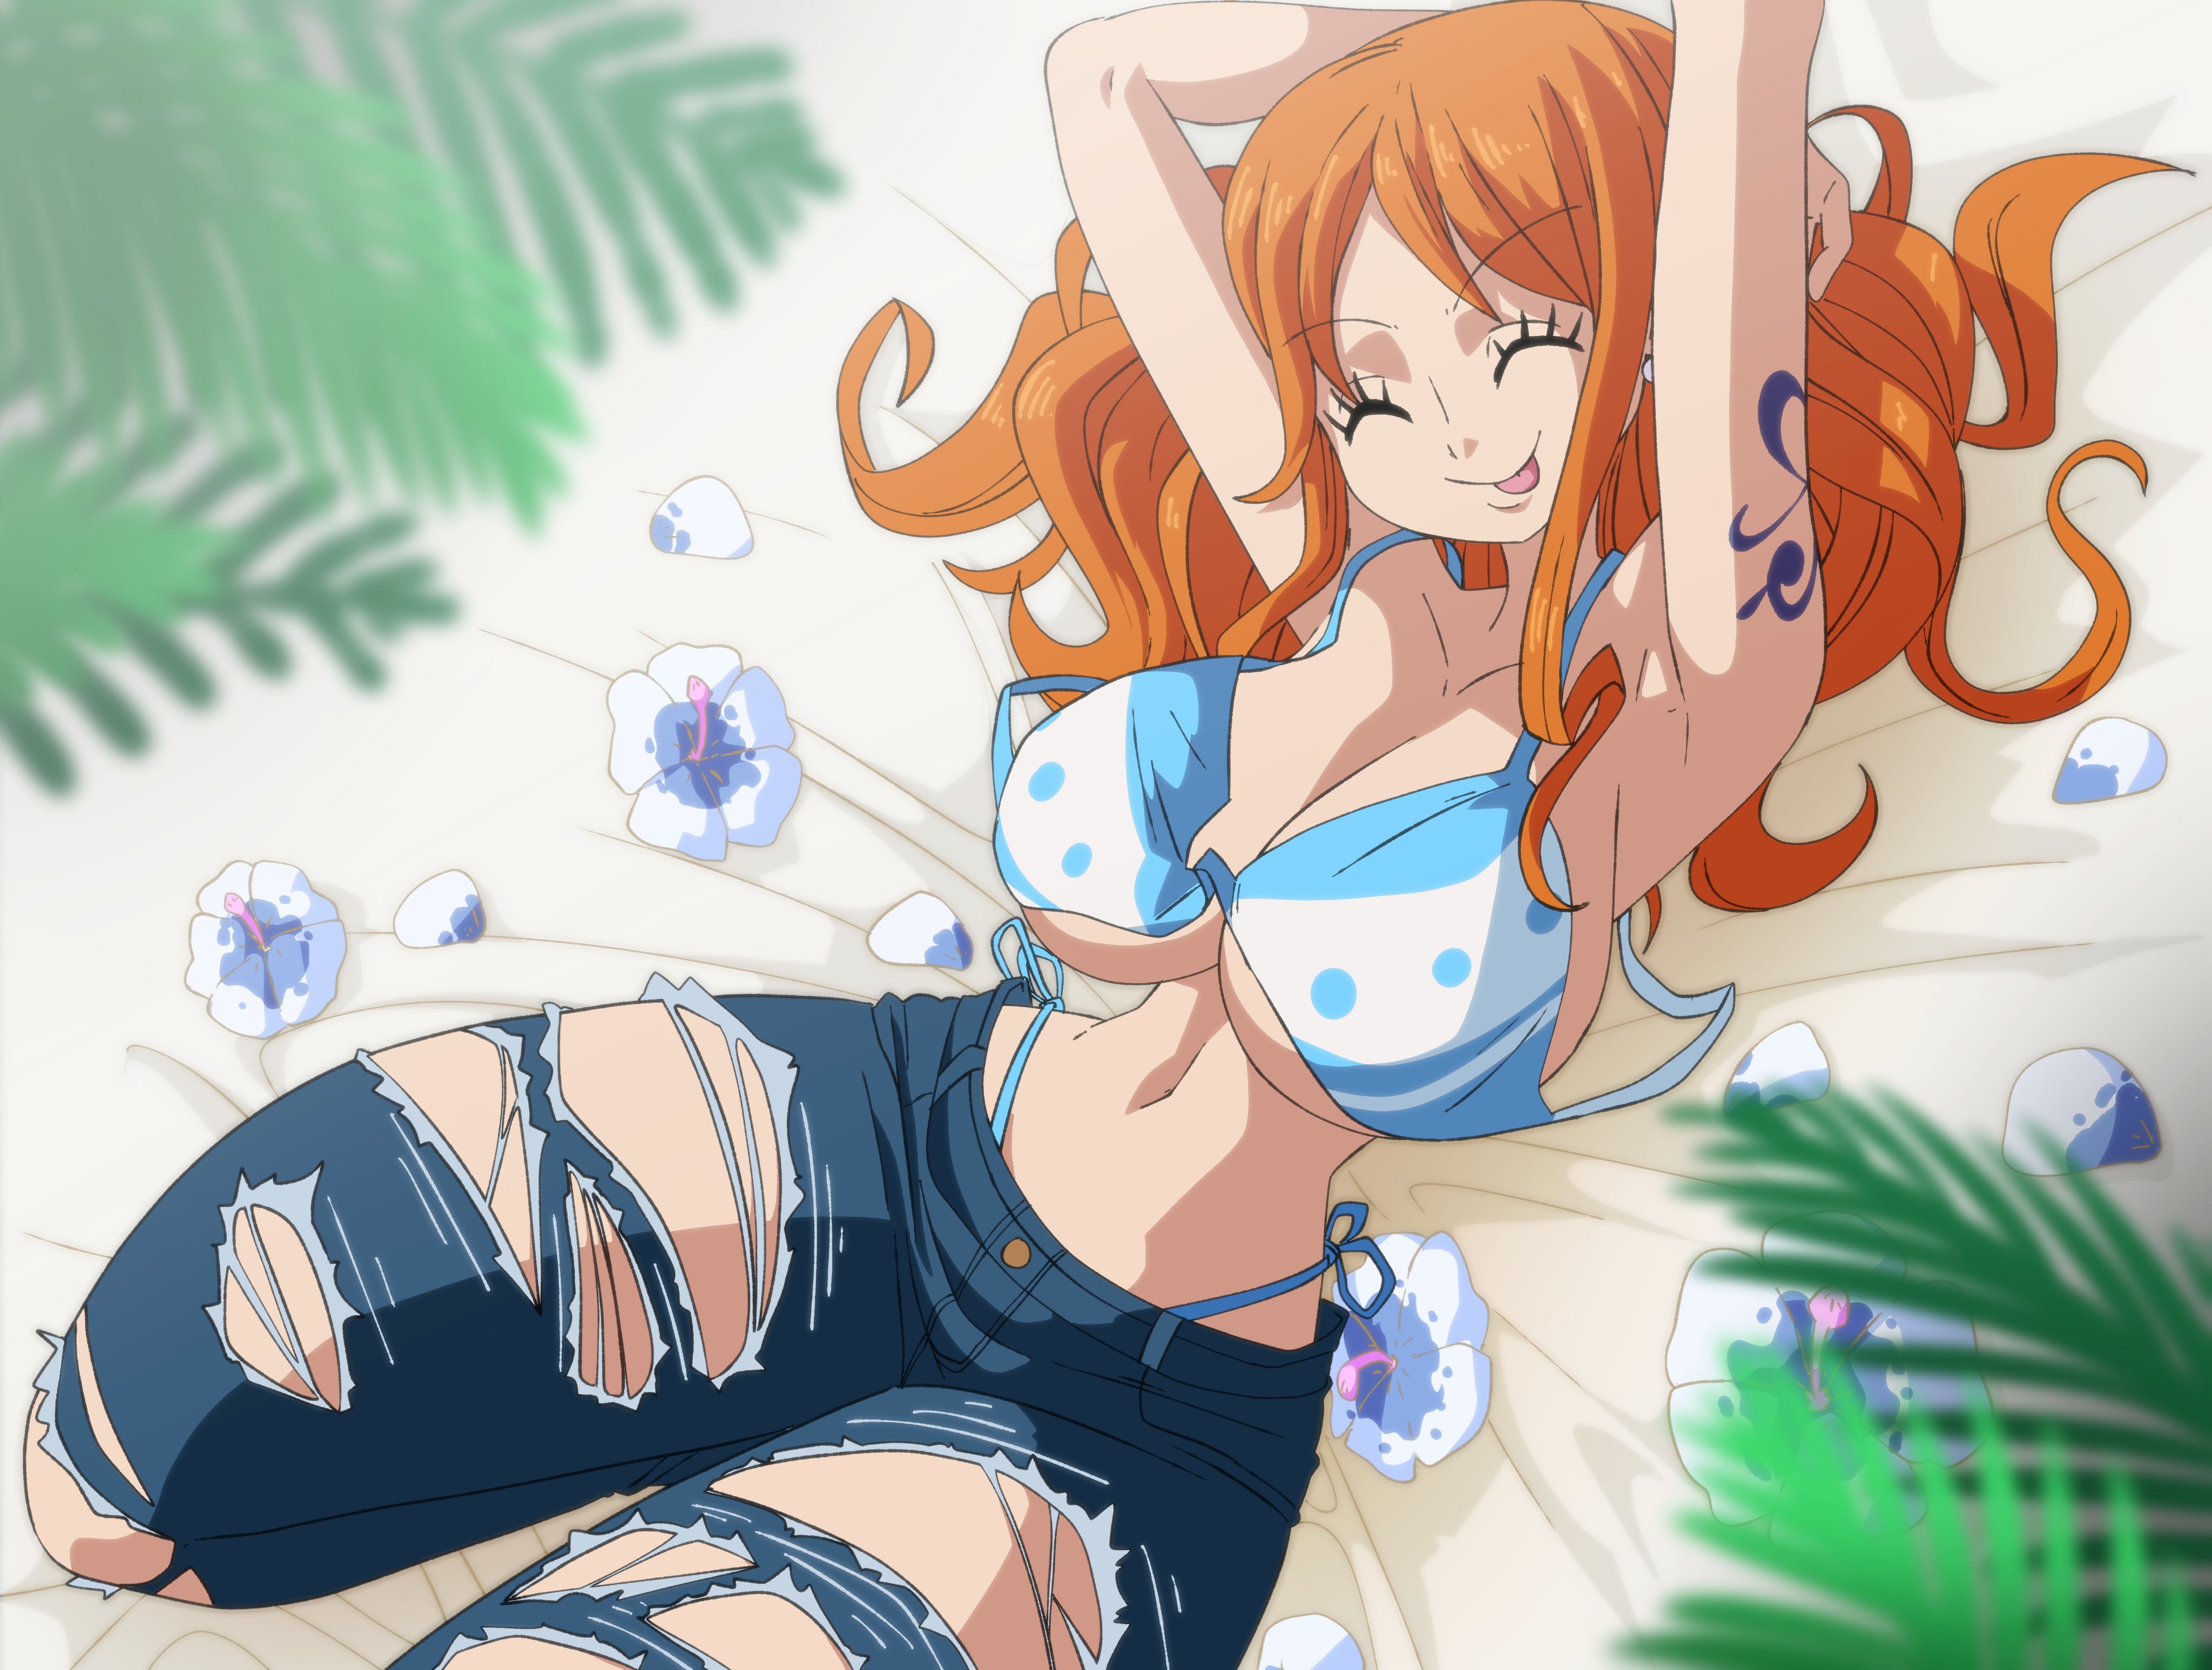 Anime 4096x3093 InkerComics One Piece Nami bikini top jeans closed eyes tongue out redhead beach belly tattoo big boobs anime girls torn clothes flowers leaves artwork torn jeans whale tails bright